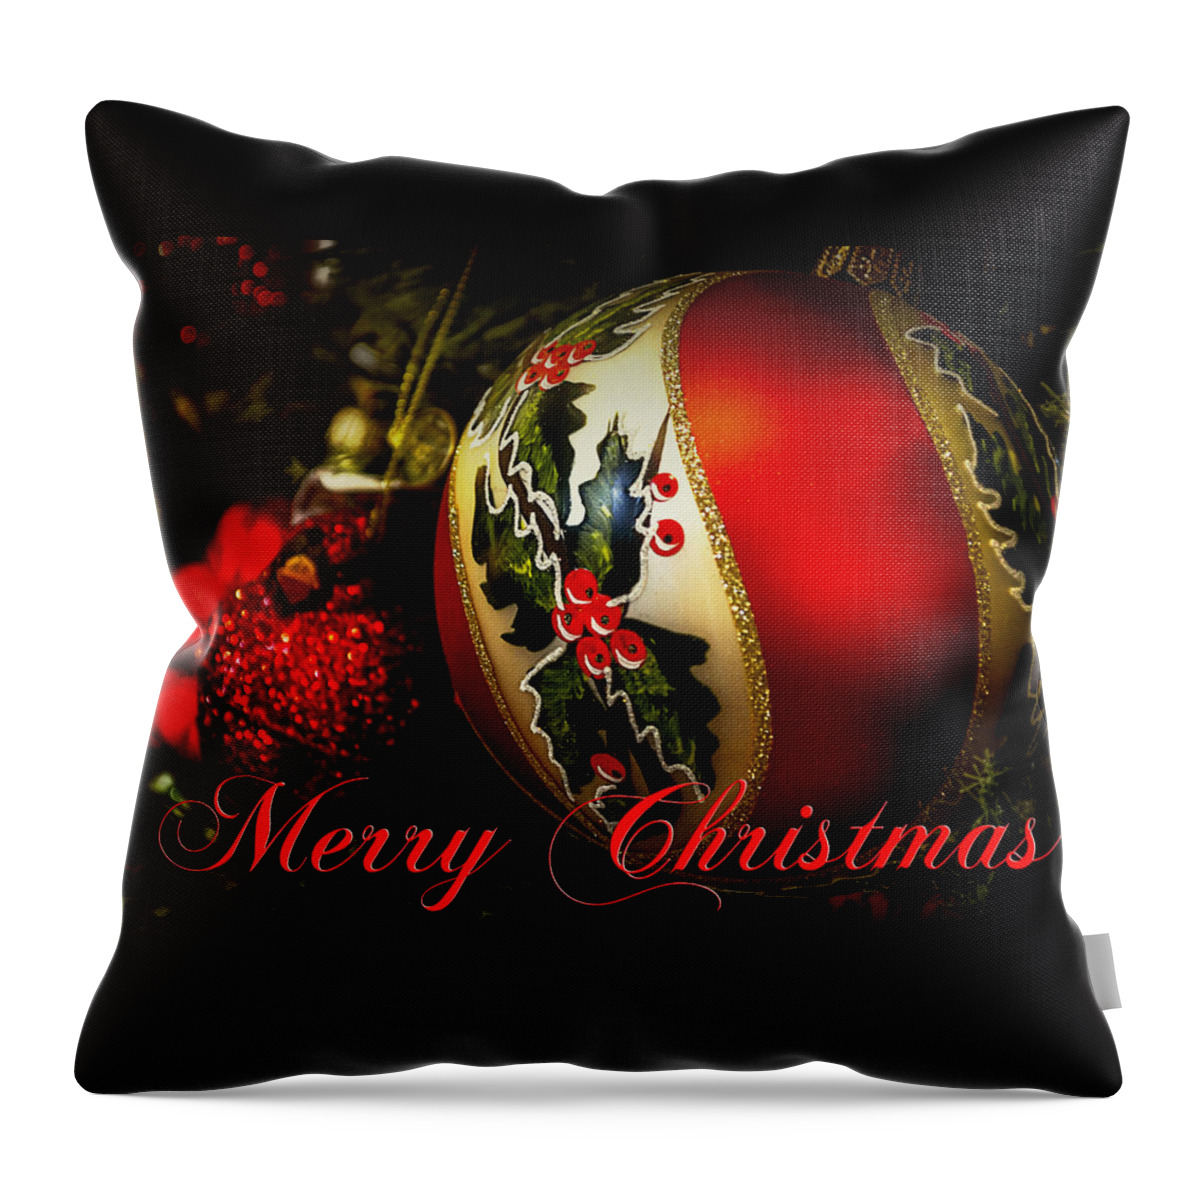 Greeting Card Throw Pillow featuring the photograph Merry Christmas Greeting Card by Julie Palencia